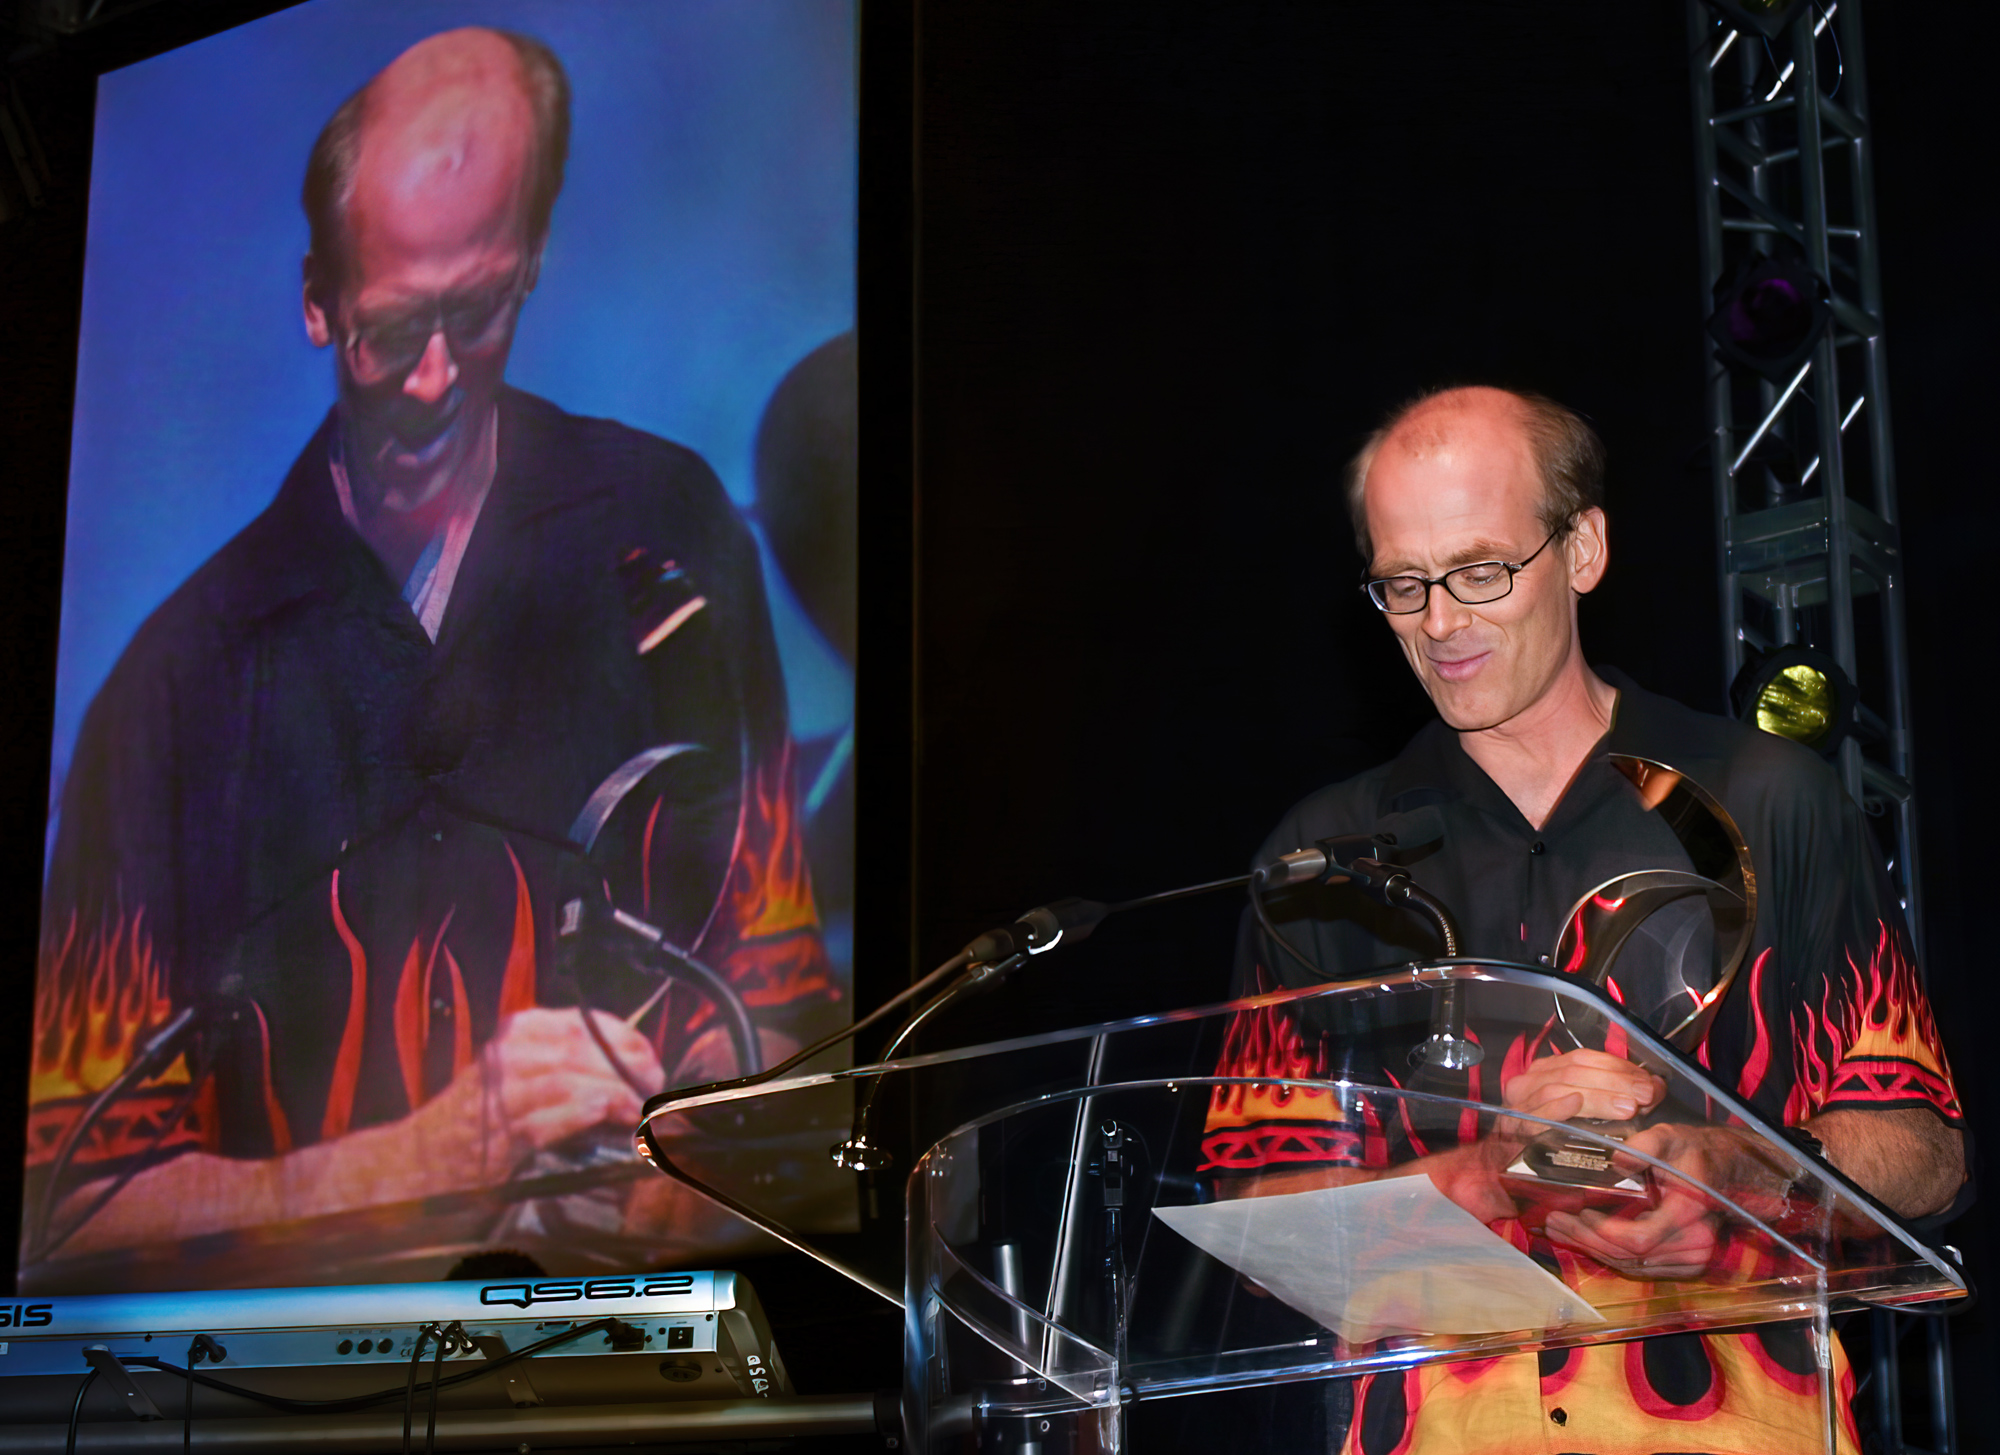 Here's Russell being inducted into the Photoshop Hall of Fame in 2002 in recognition of his many contributions to the community of Photoshop users.